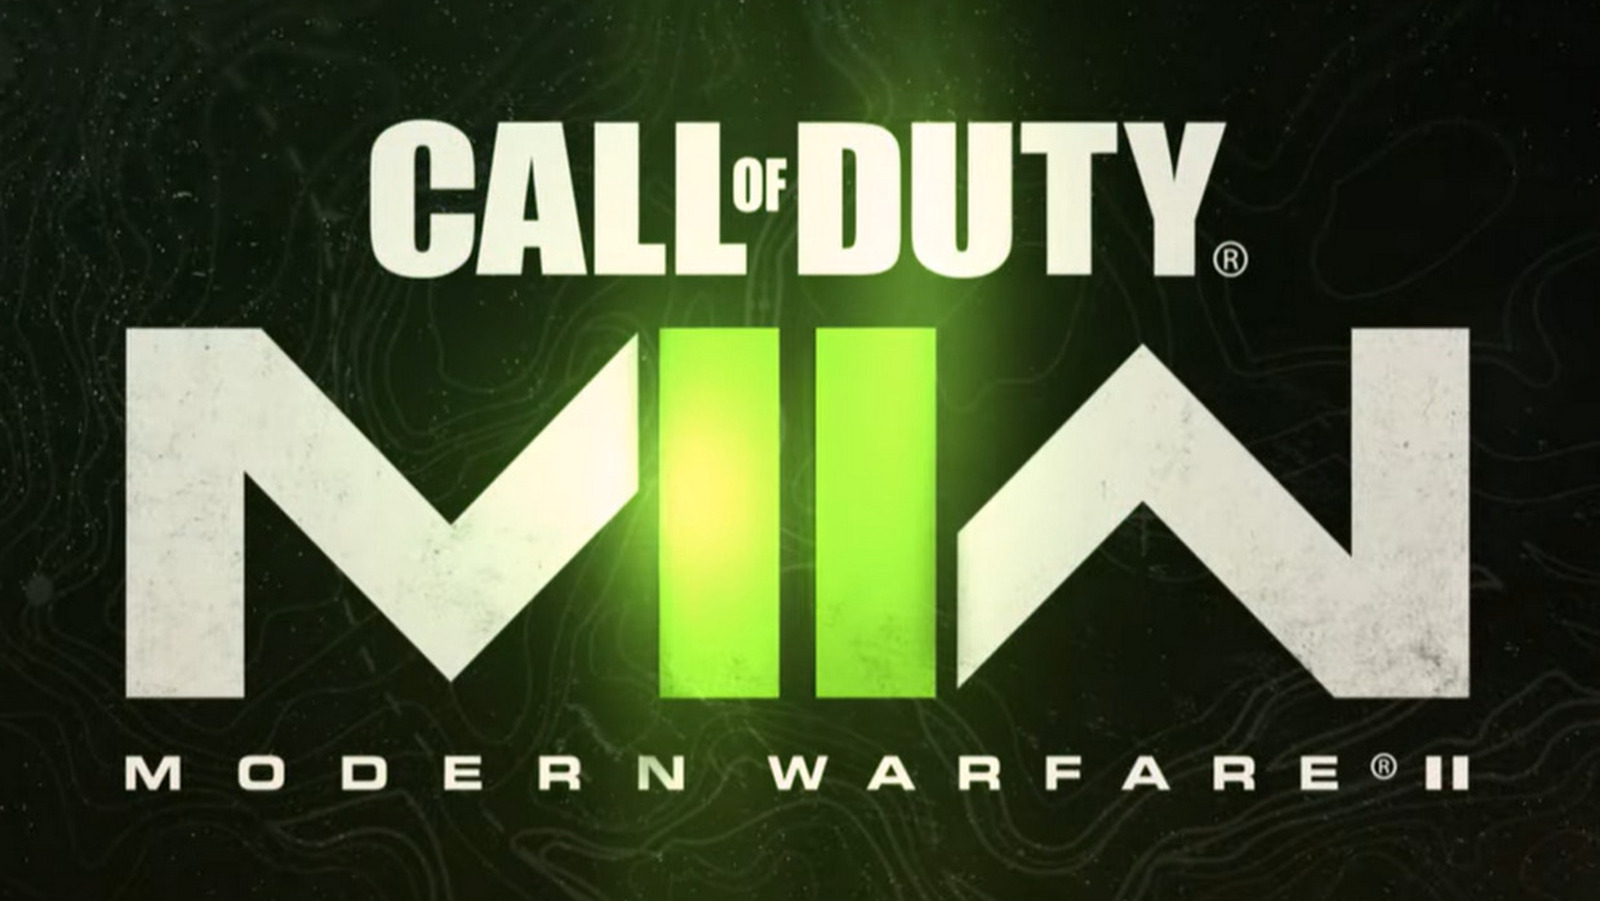 Call of Duty: Modern Warfare 2 release date set for October 28